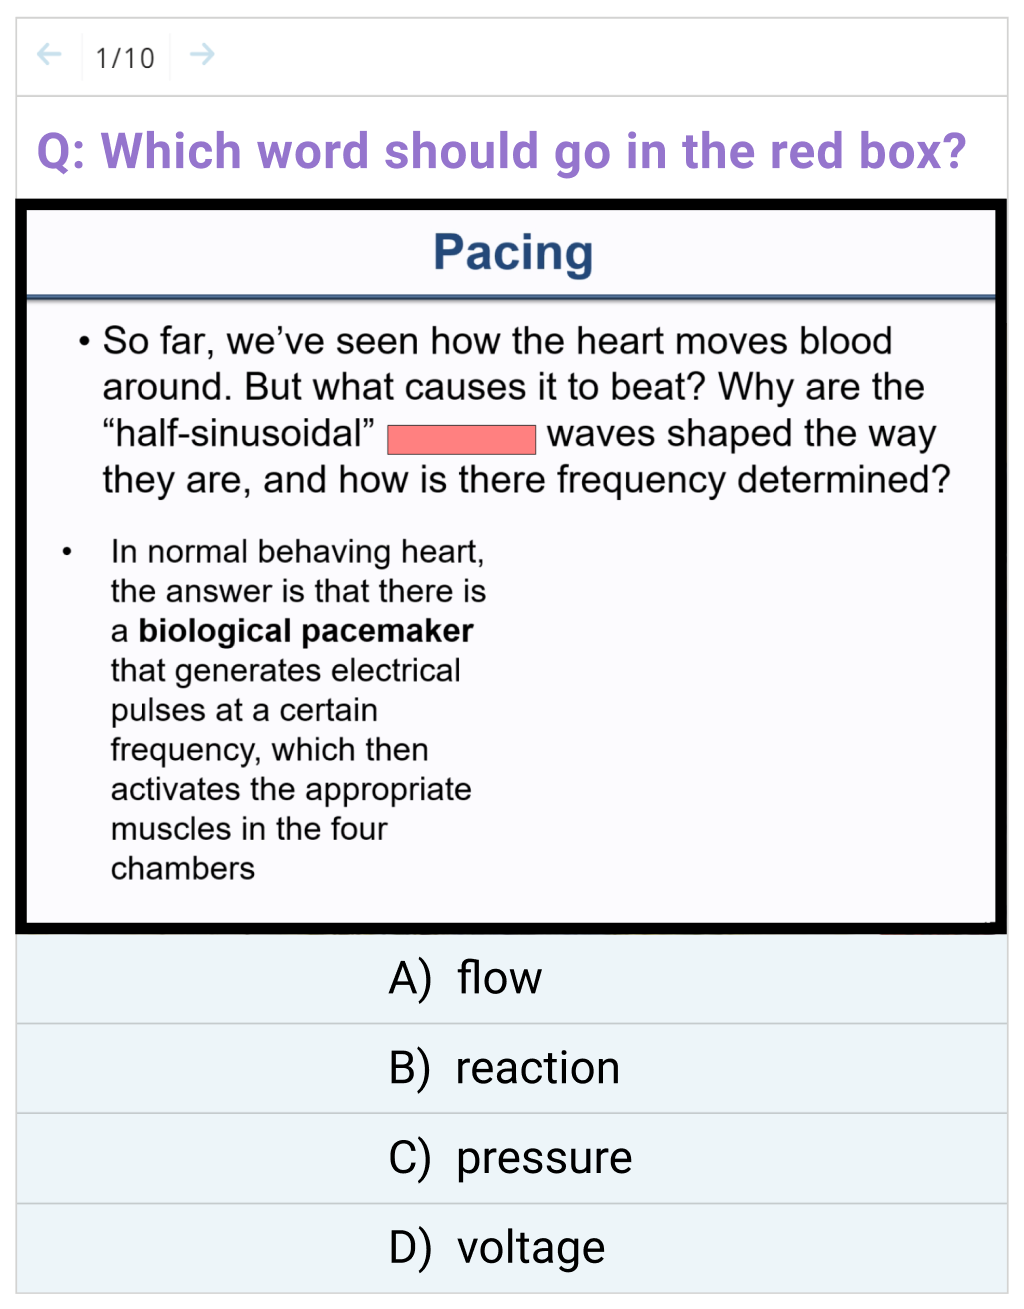 image of multiple choice quiz question